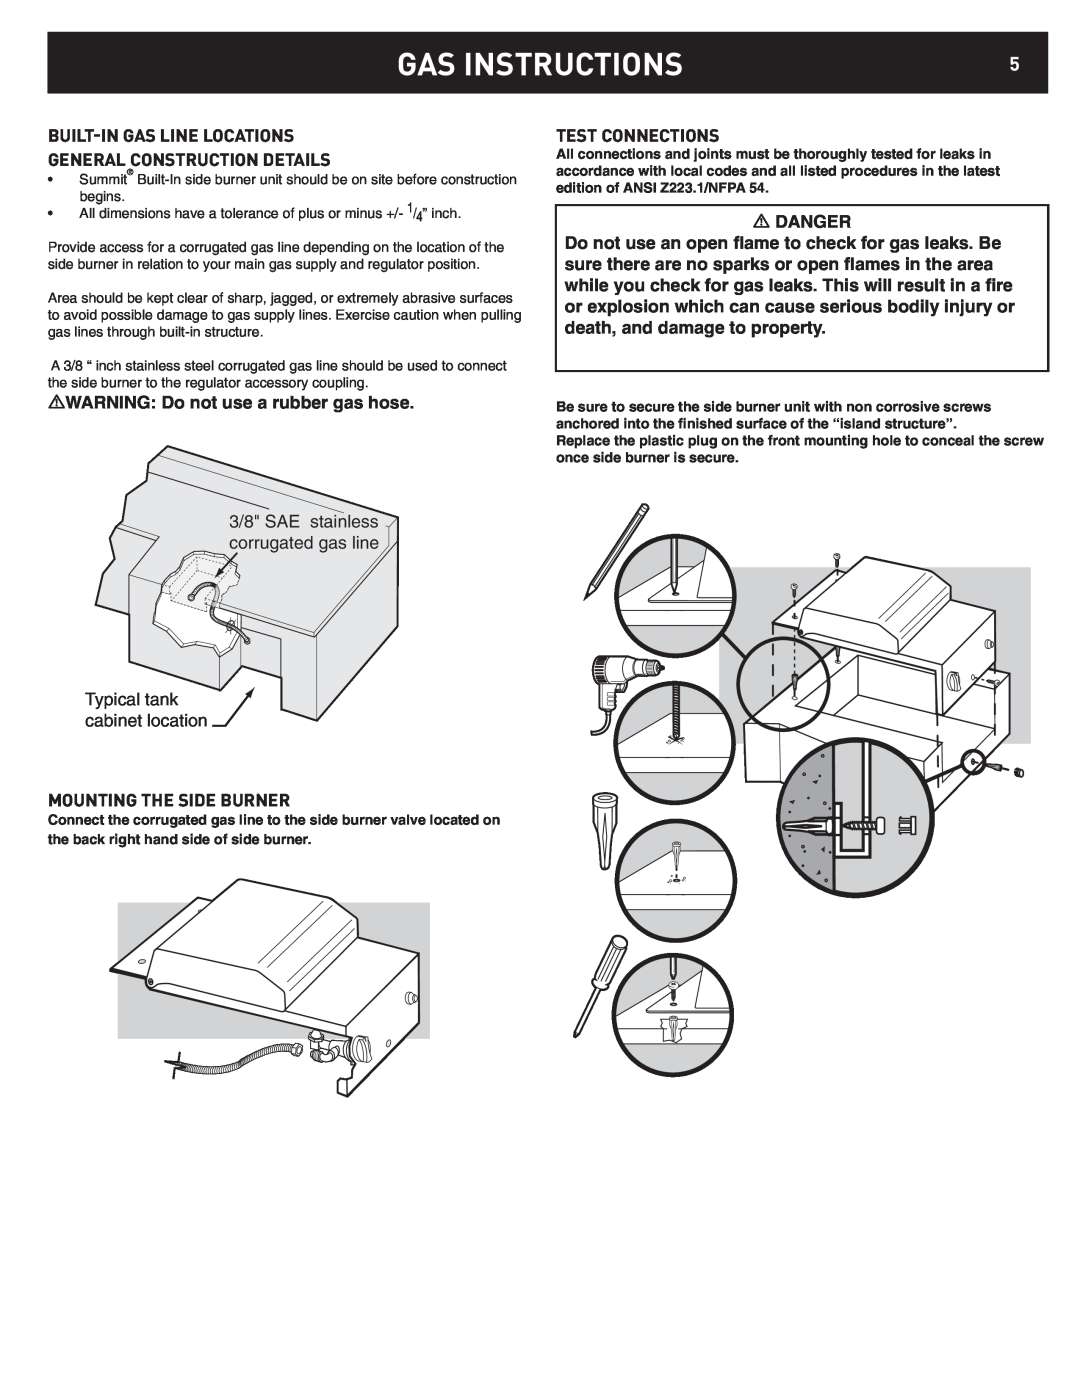 Weber 42376 manual Built-Ingas Line Locations, General Construction Details, Test Connections, Mounting The Side Burner 